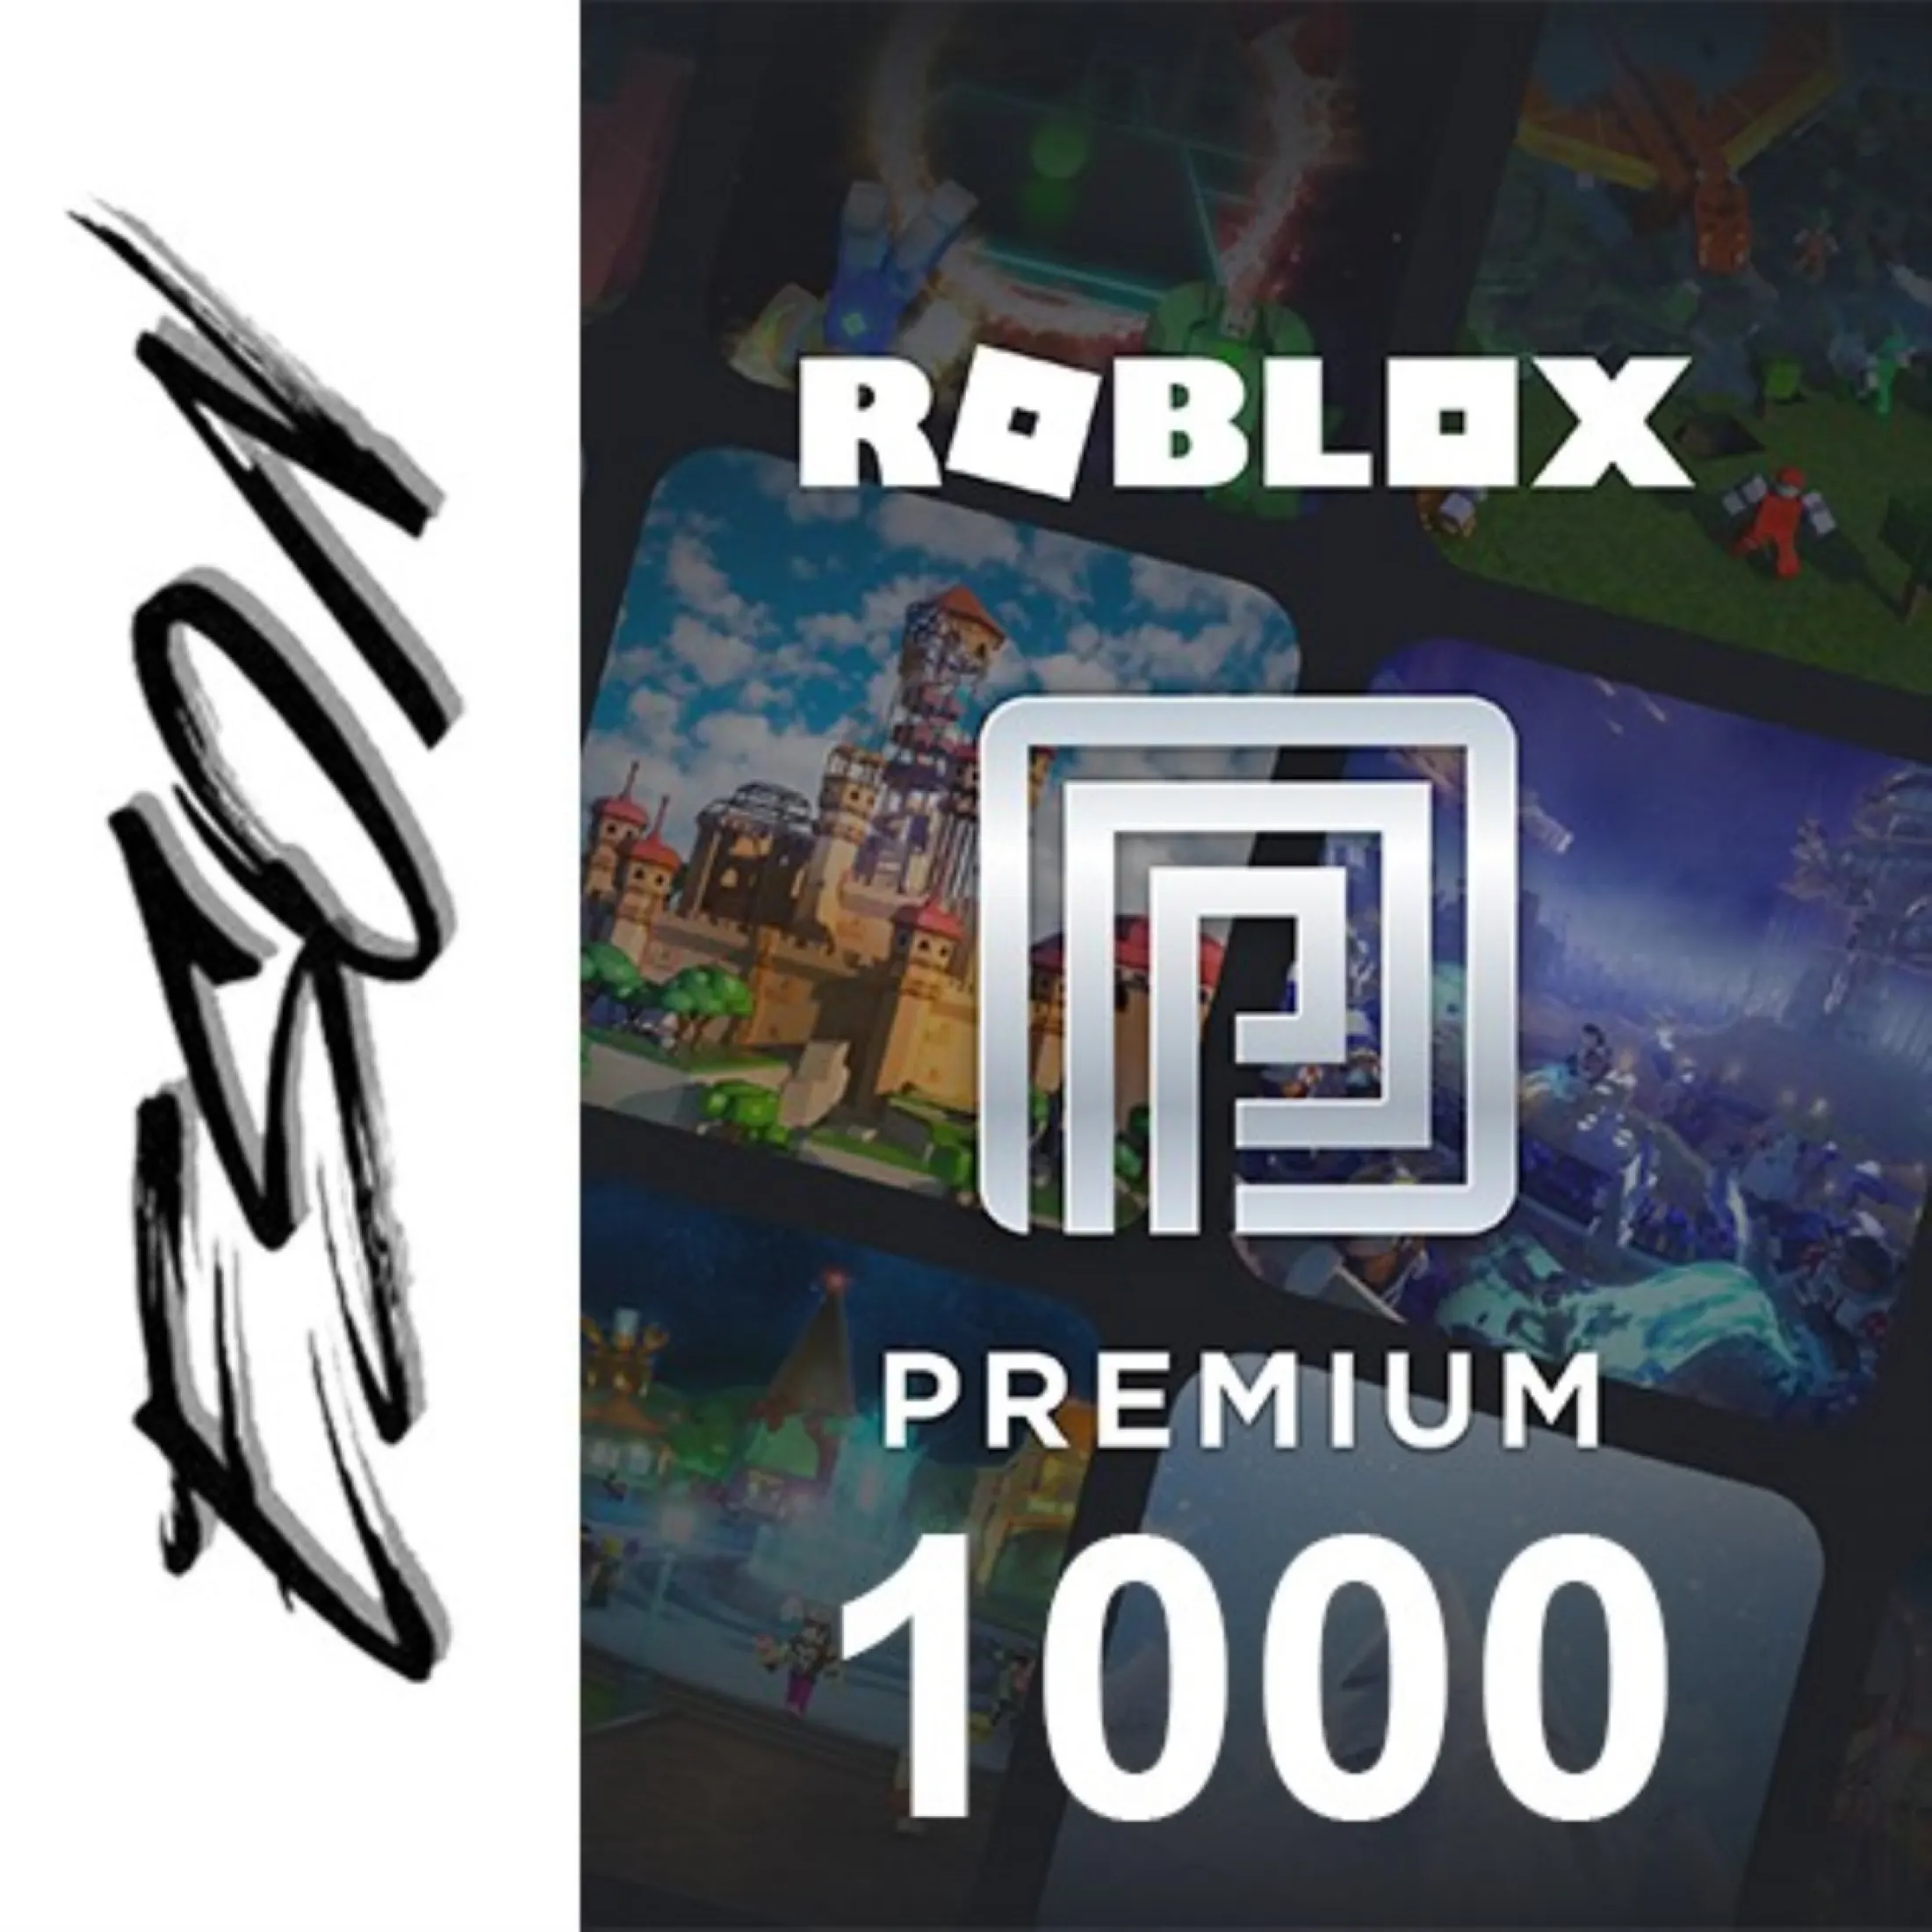 Limited Time Special Roblox Robux Premium 1000 Digital Code Lazada Ph - 1 000 robux code